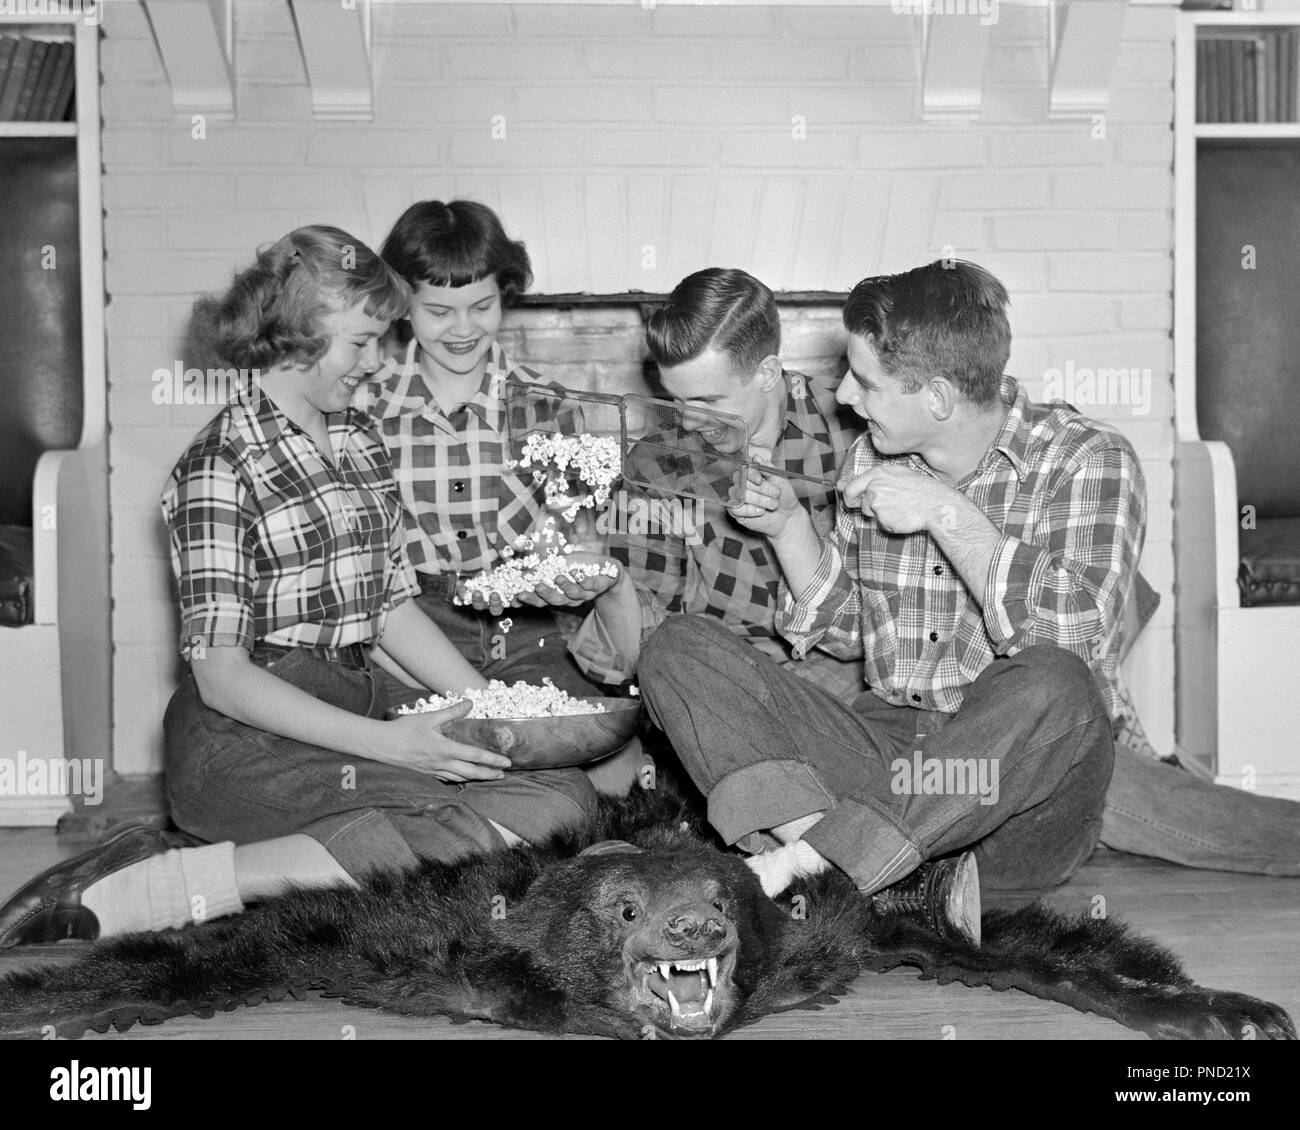 1950s GROUP TEENS POPPING POPCORN SMILE LAUGHING JOKING AROUND BEAR SKIN RUG FIREPLACE WEARING PLAID SHIRTS JEANS - j3343 LAN001 HARS TEAMWORK RUG PLEASED JOY LIFESTYLE CELEBRATION FEMALES HEALTHINESS HOME LIFE COPY SPACE FRIENDSHIP HALF-LENGTH PERSONS CLOTH MALES TEENAGE GIRL TEENAGE BOY PLAID DENIM SKIN POPCORN B&W HAPPINESS SHIRTS SMILES JOYFUL POPPING STYLISH TEENAGED BOBBY SOX BLUE JEANS JOKING JUVENILES TOGETHERNESS WIRE BASKET BLACK AND WHITE CAUCASIAN ETHNICITY OLD FASHIONED Stock Photo